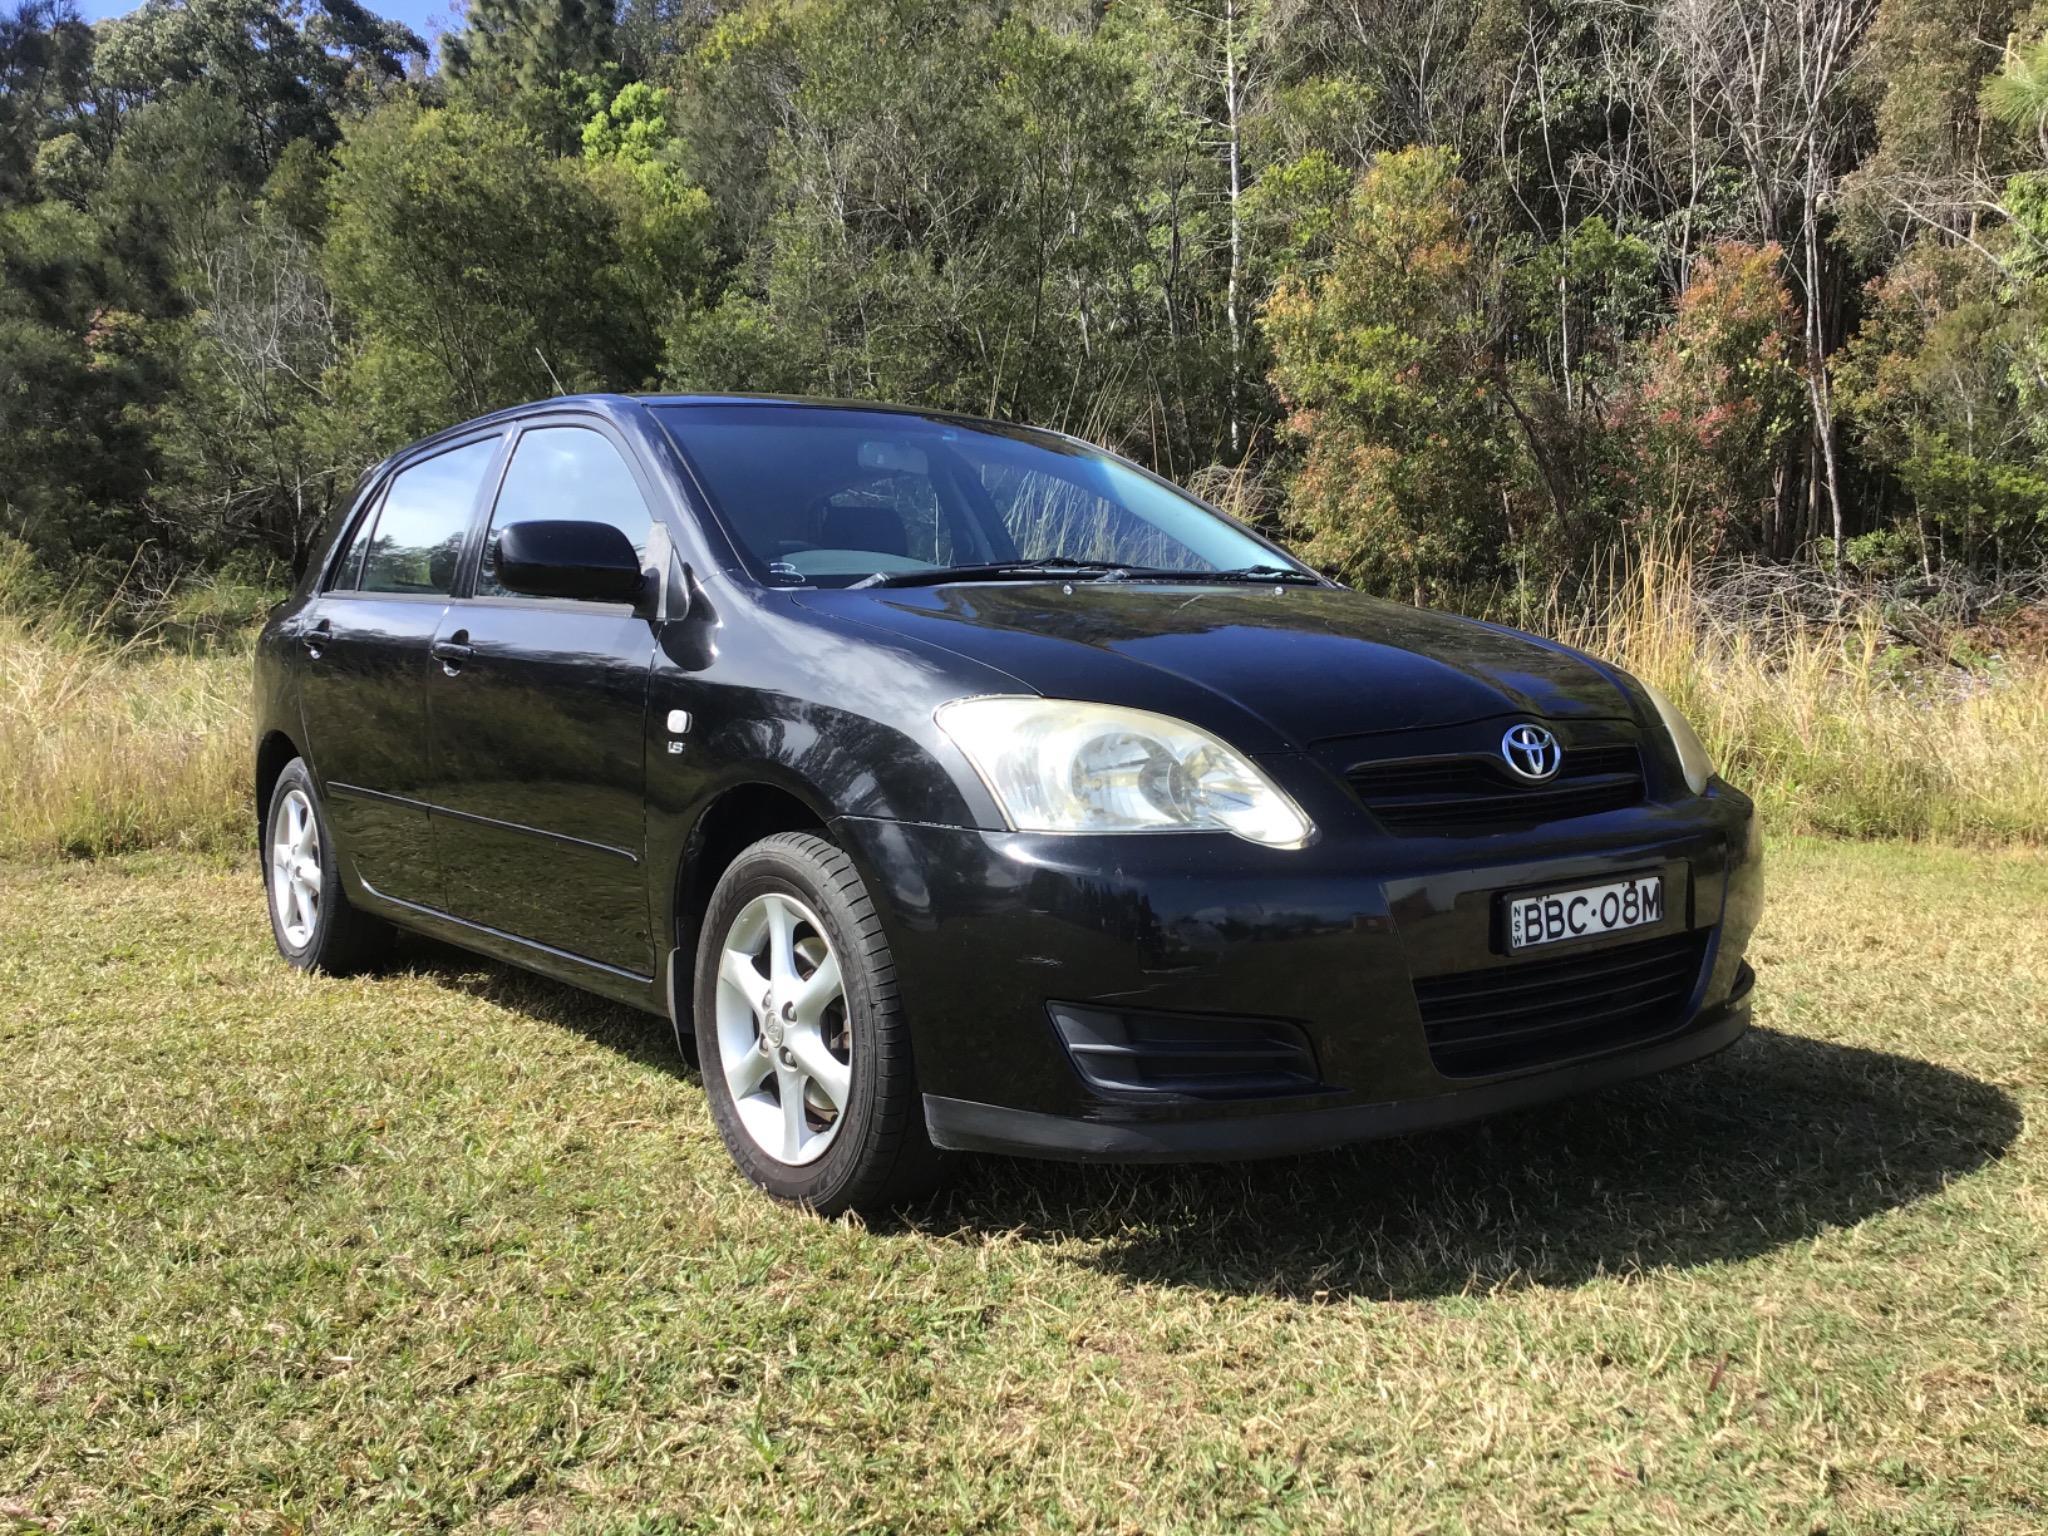 2007 Toyota Corolla ZZE122R 5Y Conquest Hatchback 5dr Man 5sp 1.8i (May) Picture 8